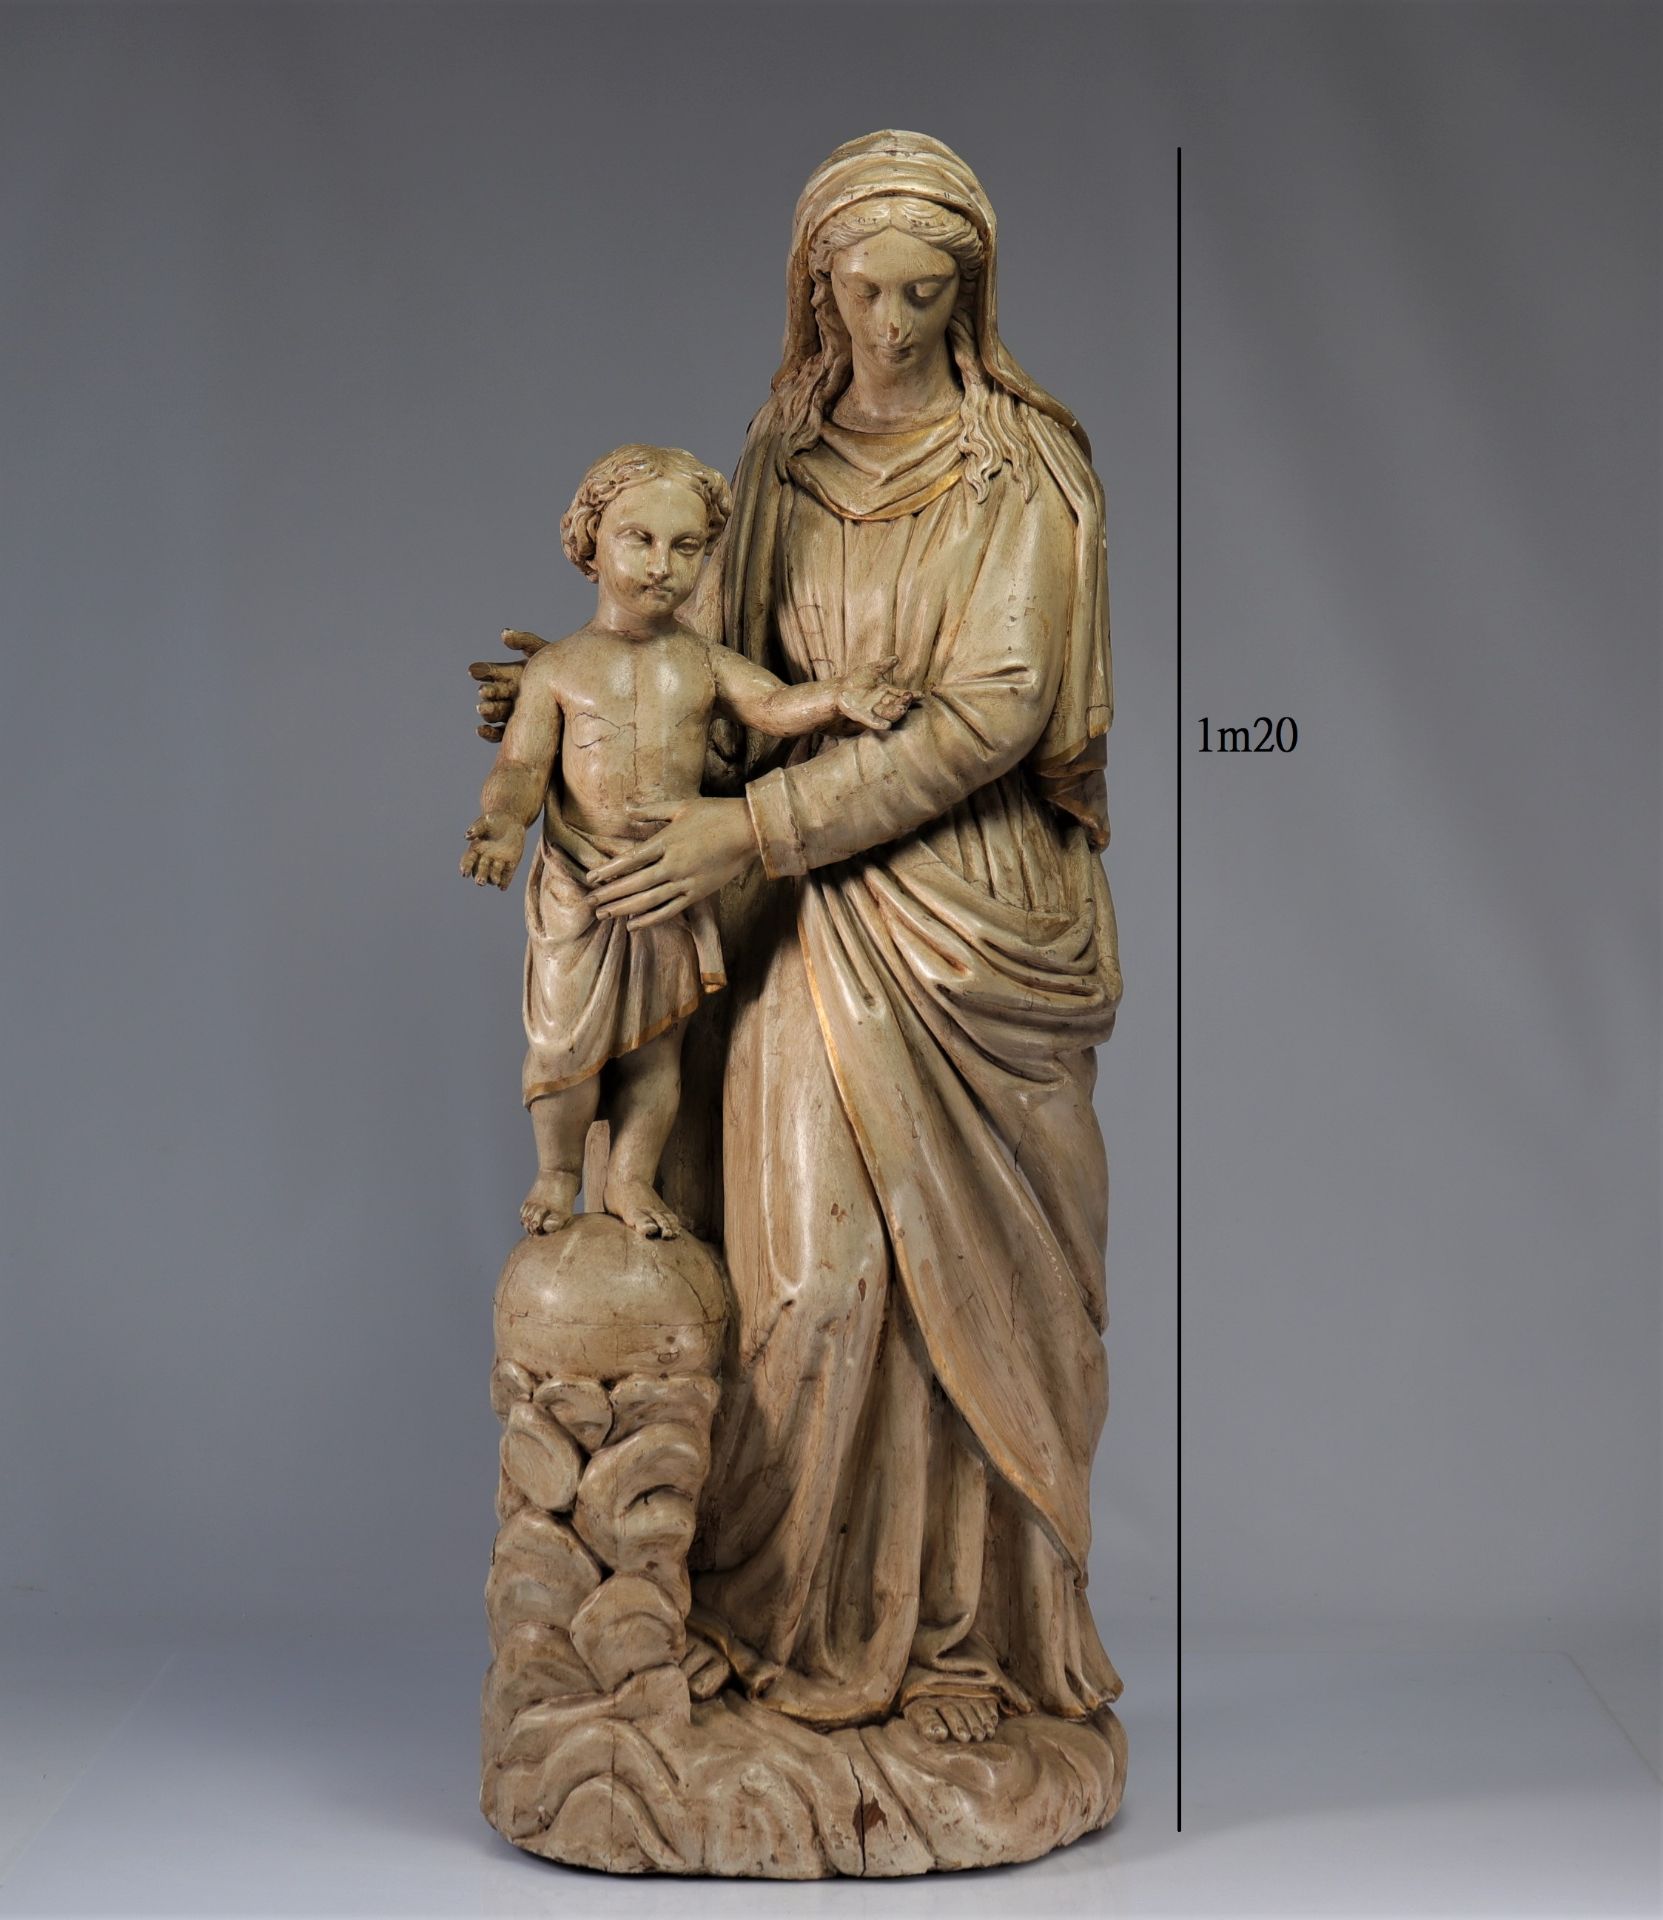 Large wooden sculpture of the Virgin and Child from 17th century